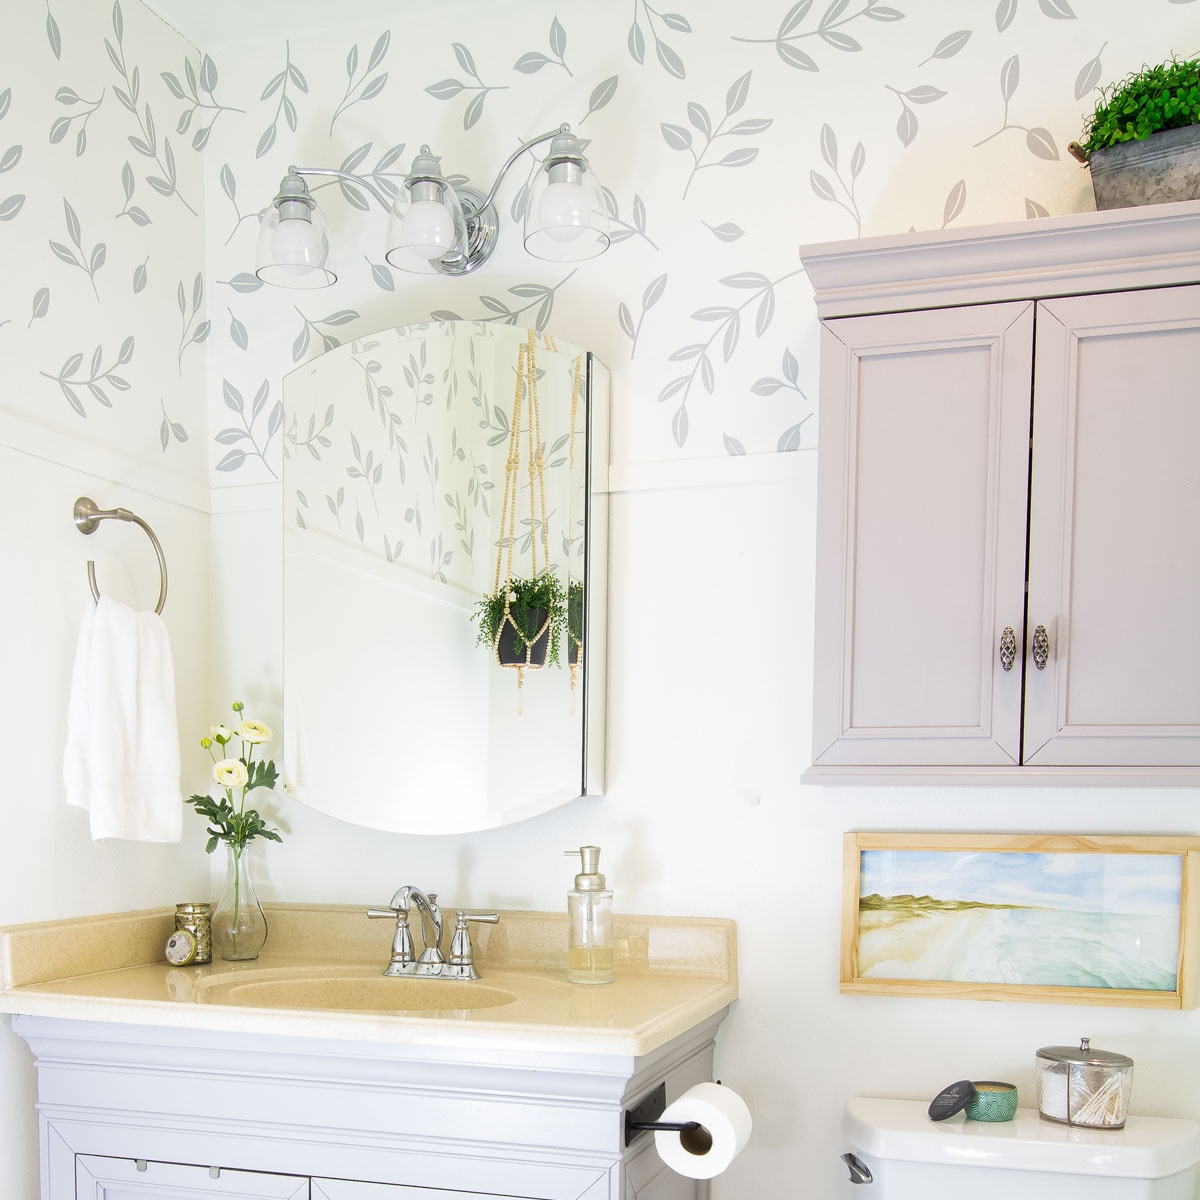 how to use vinyl decals for a wallpaper look bathroom wall with frog tape and vinyl decal leaves in bathroom